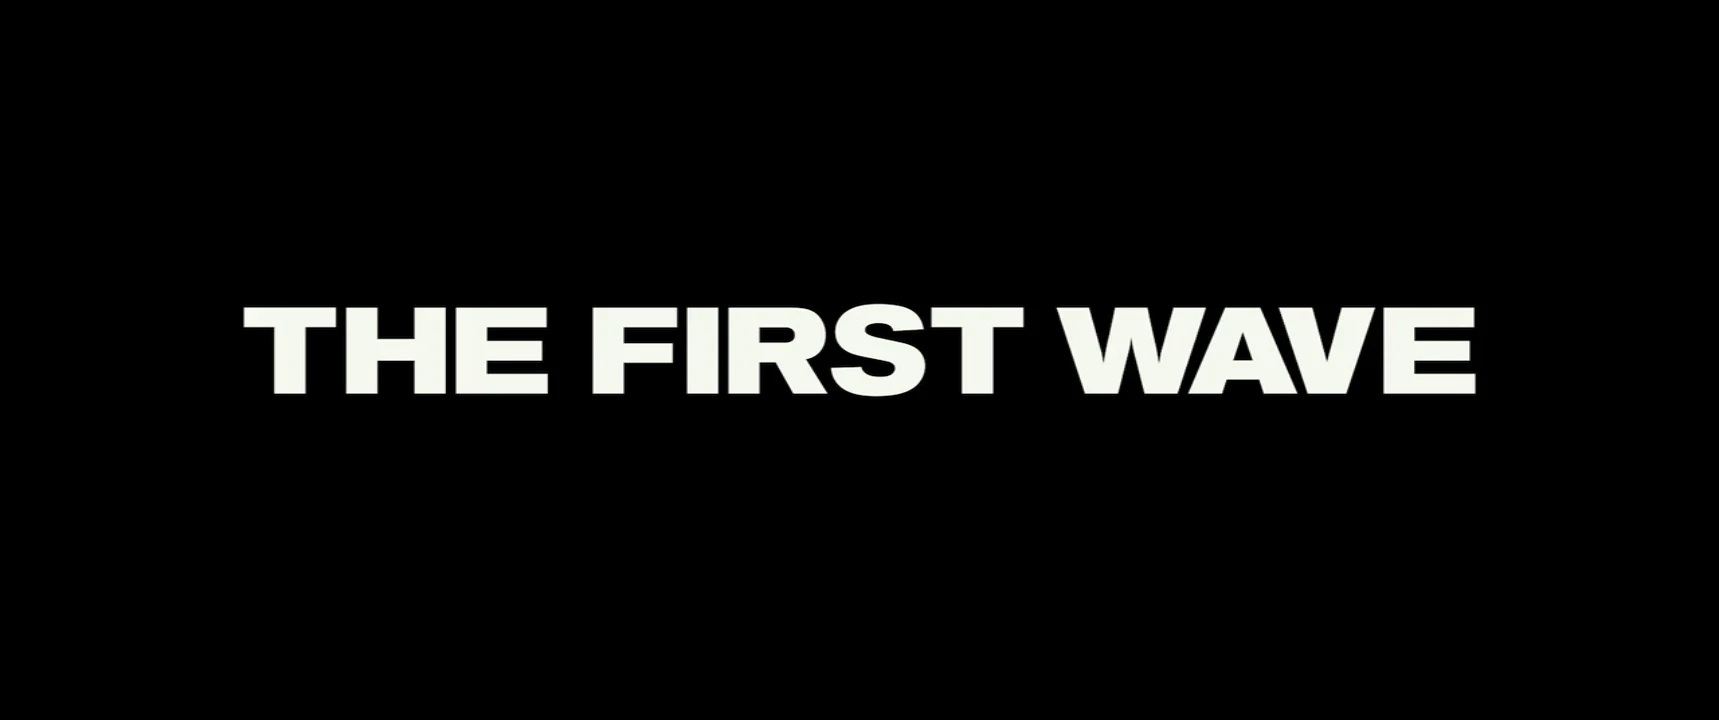 The First Wave – VF [DOC 2021]